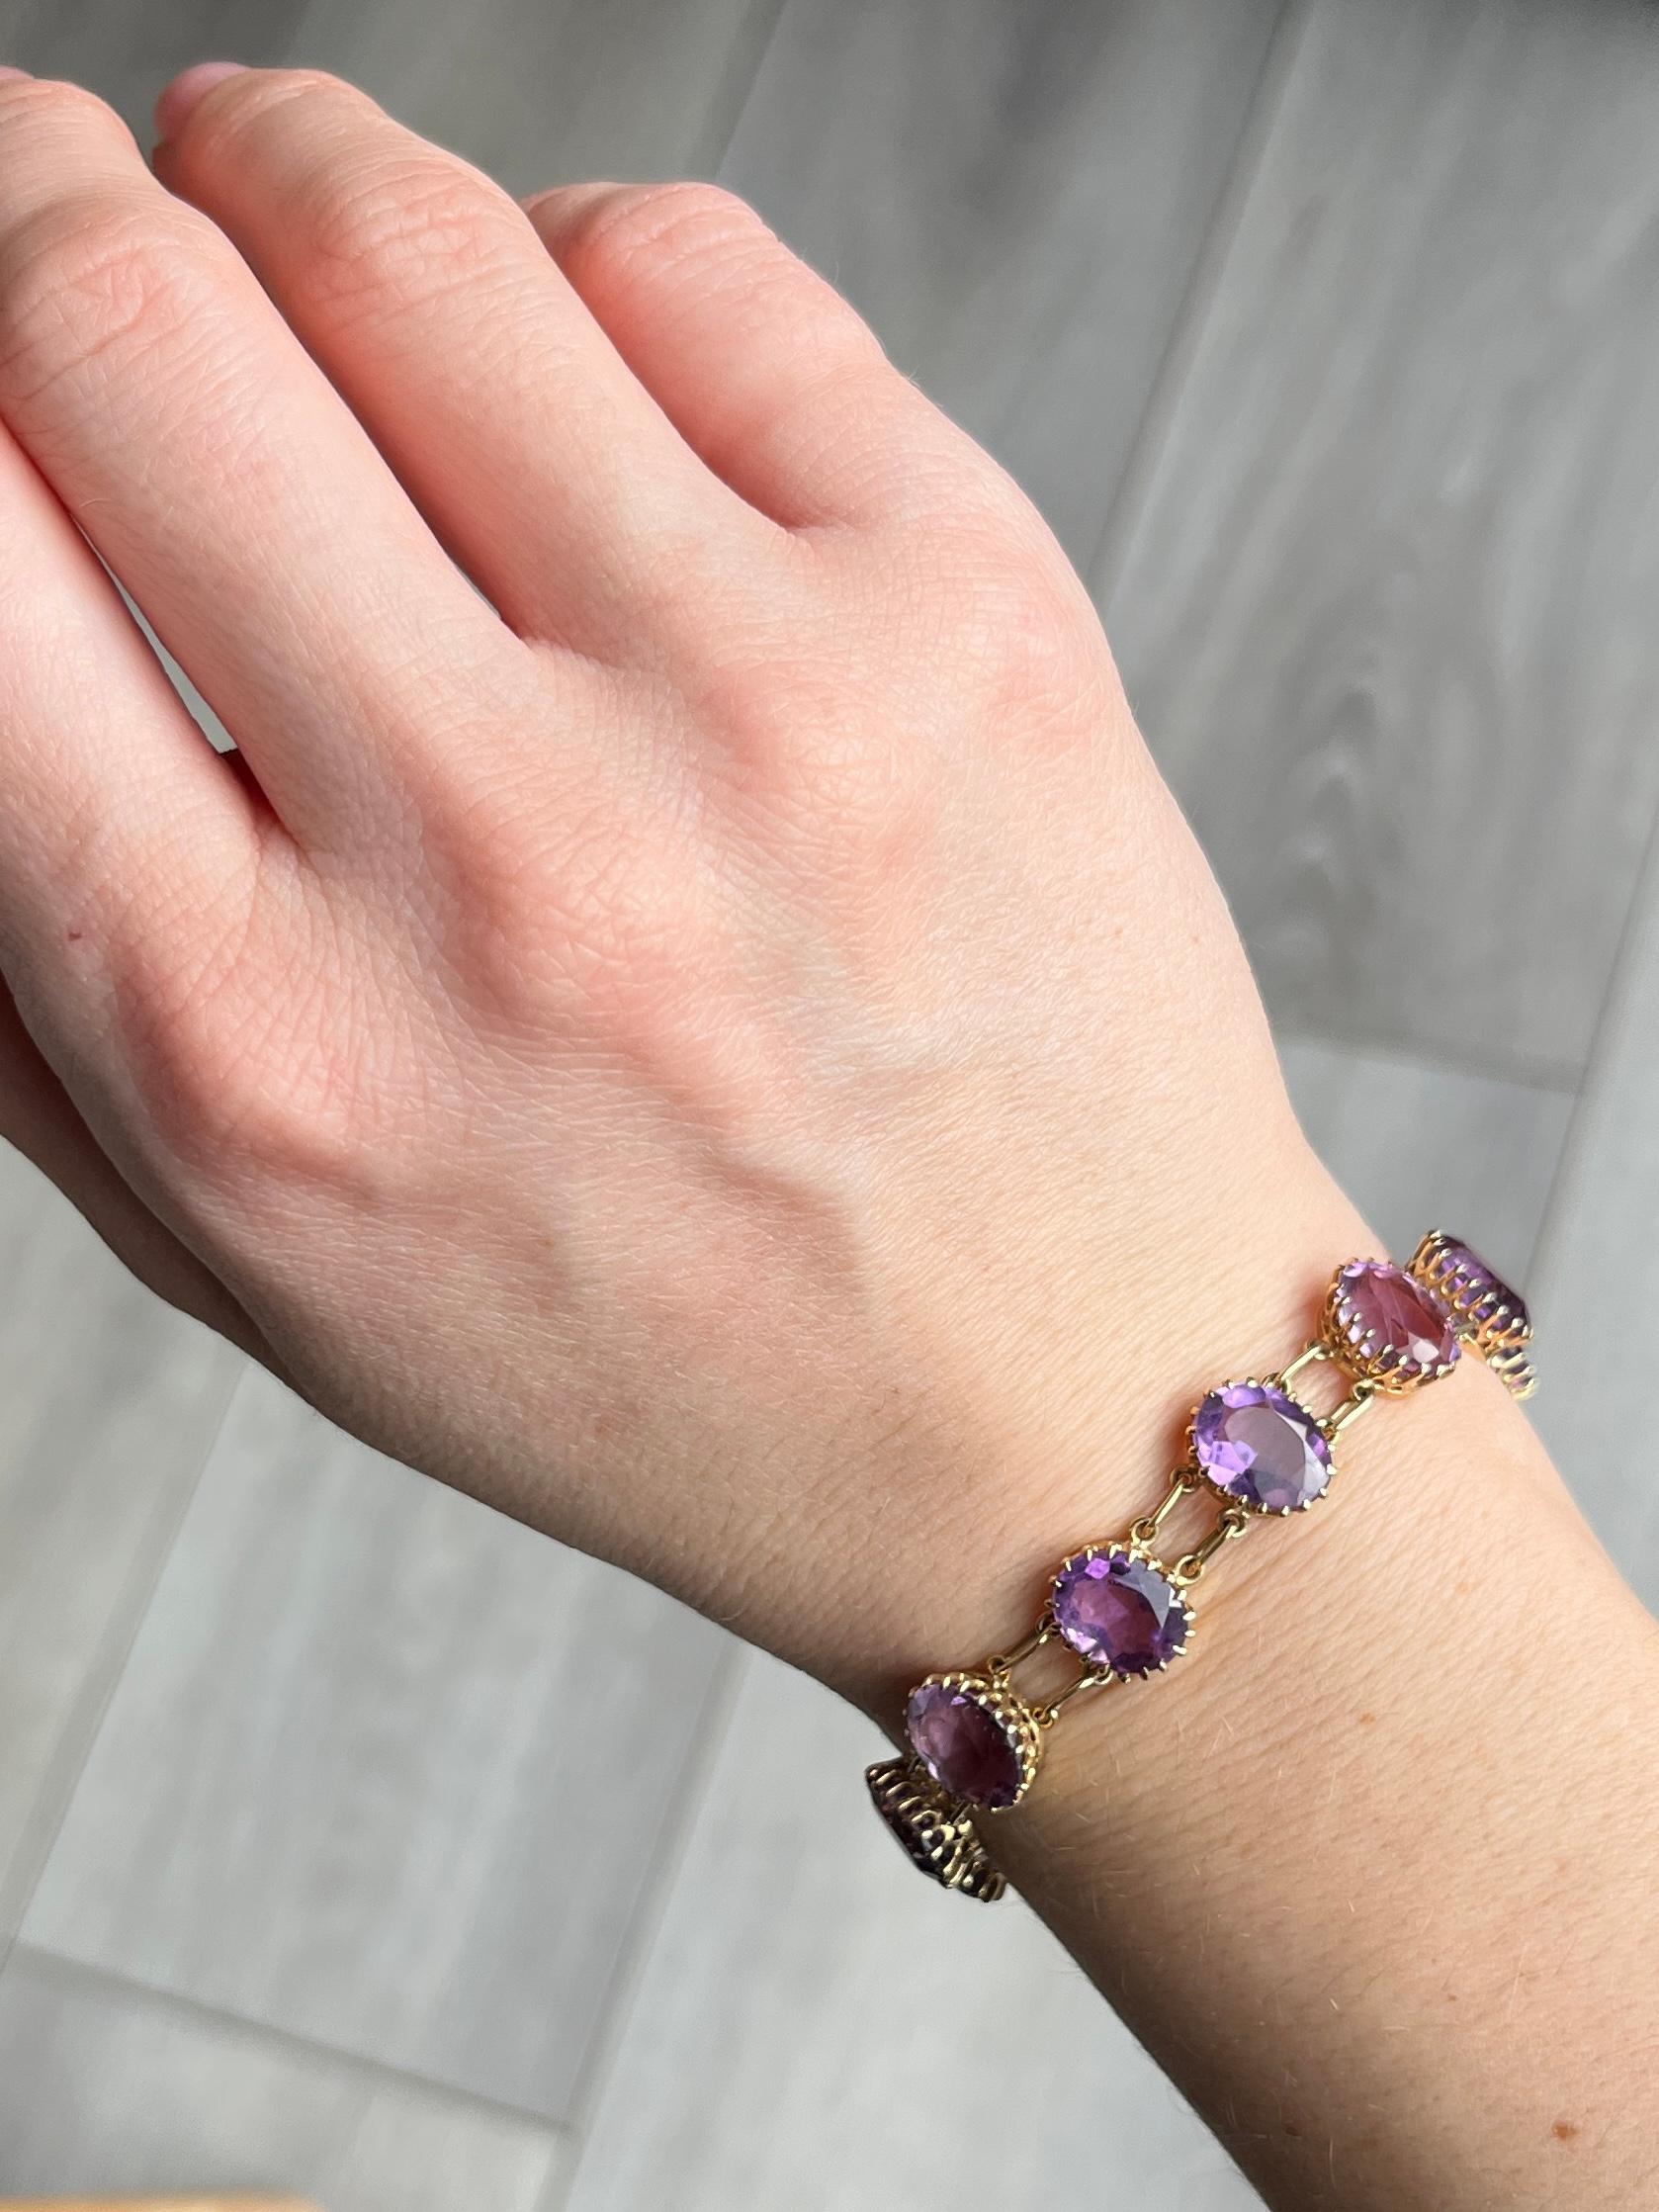 Such a decorative piece! This bracelet is made up of fourteen amethyst stones. The clasp even has an amethyst stone set on it so it is nearly invisible. Modelled in 9 carat gold. 

Length: 20.5cm
Stone Dimensions: 10x8mm

Weight: 17.1g